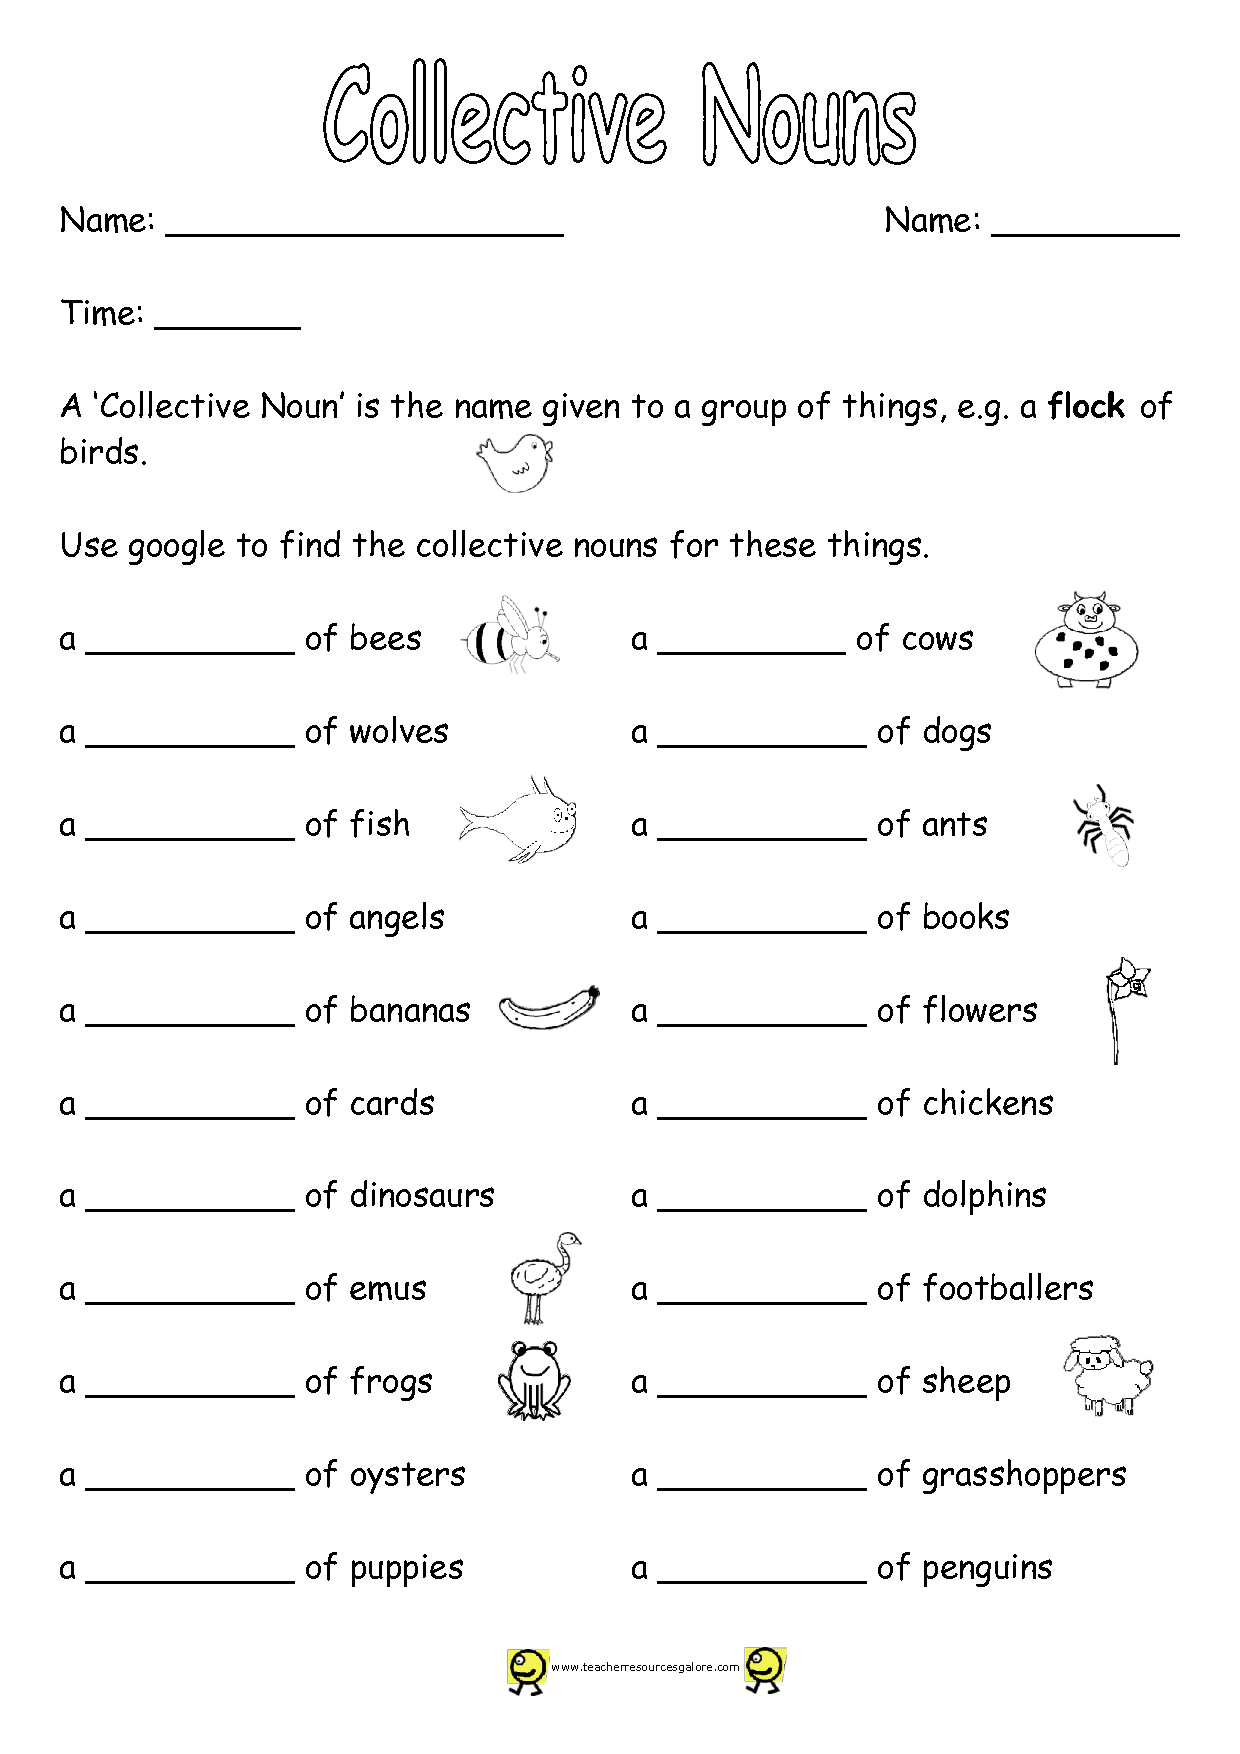 collective-nouns-worksheets-for-grade-6-kamberlawgroup